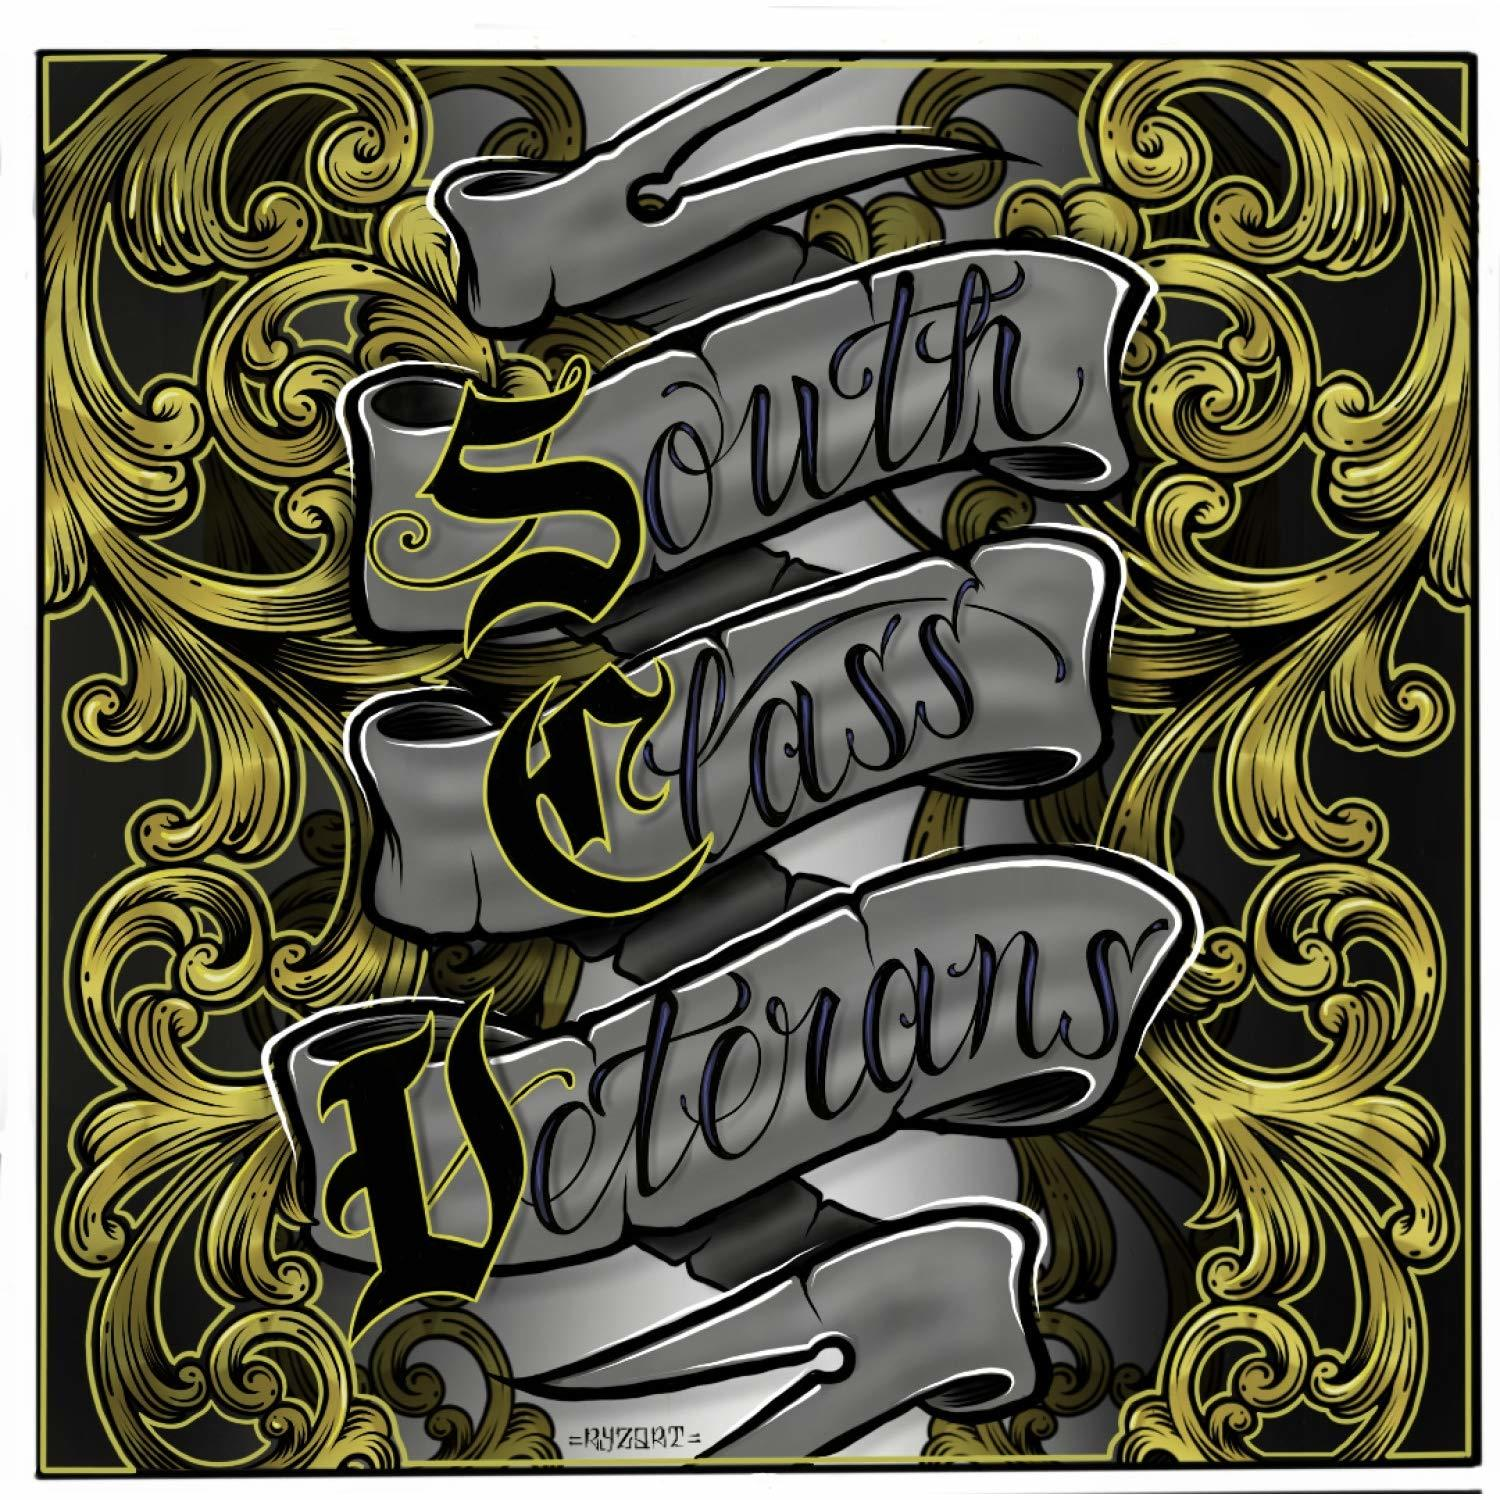 South Class Veterans - (CD) Pay To - Hell